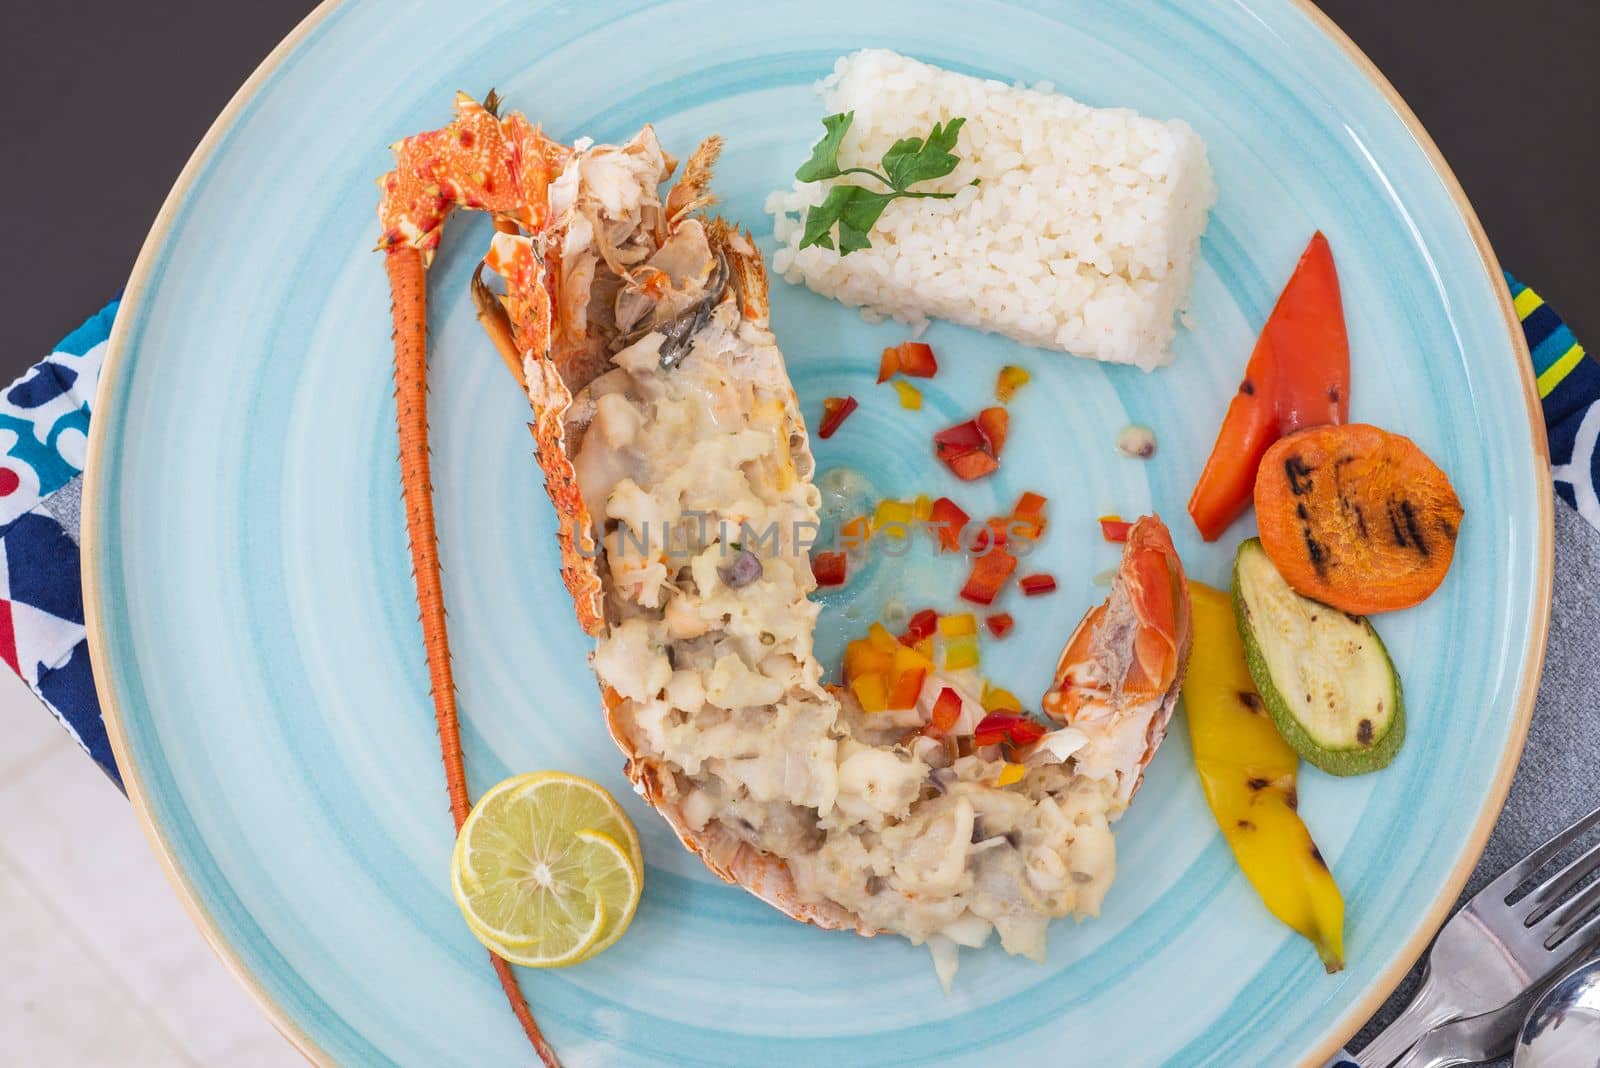 Stuffed lobster dish a la carte meal with white rice and vegetables at restaurant table setting